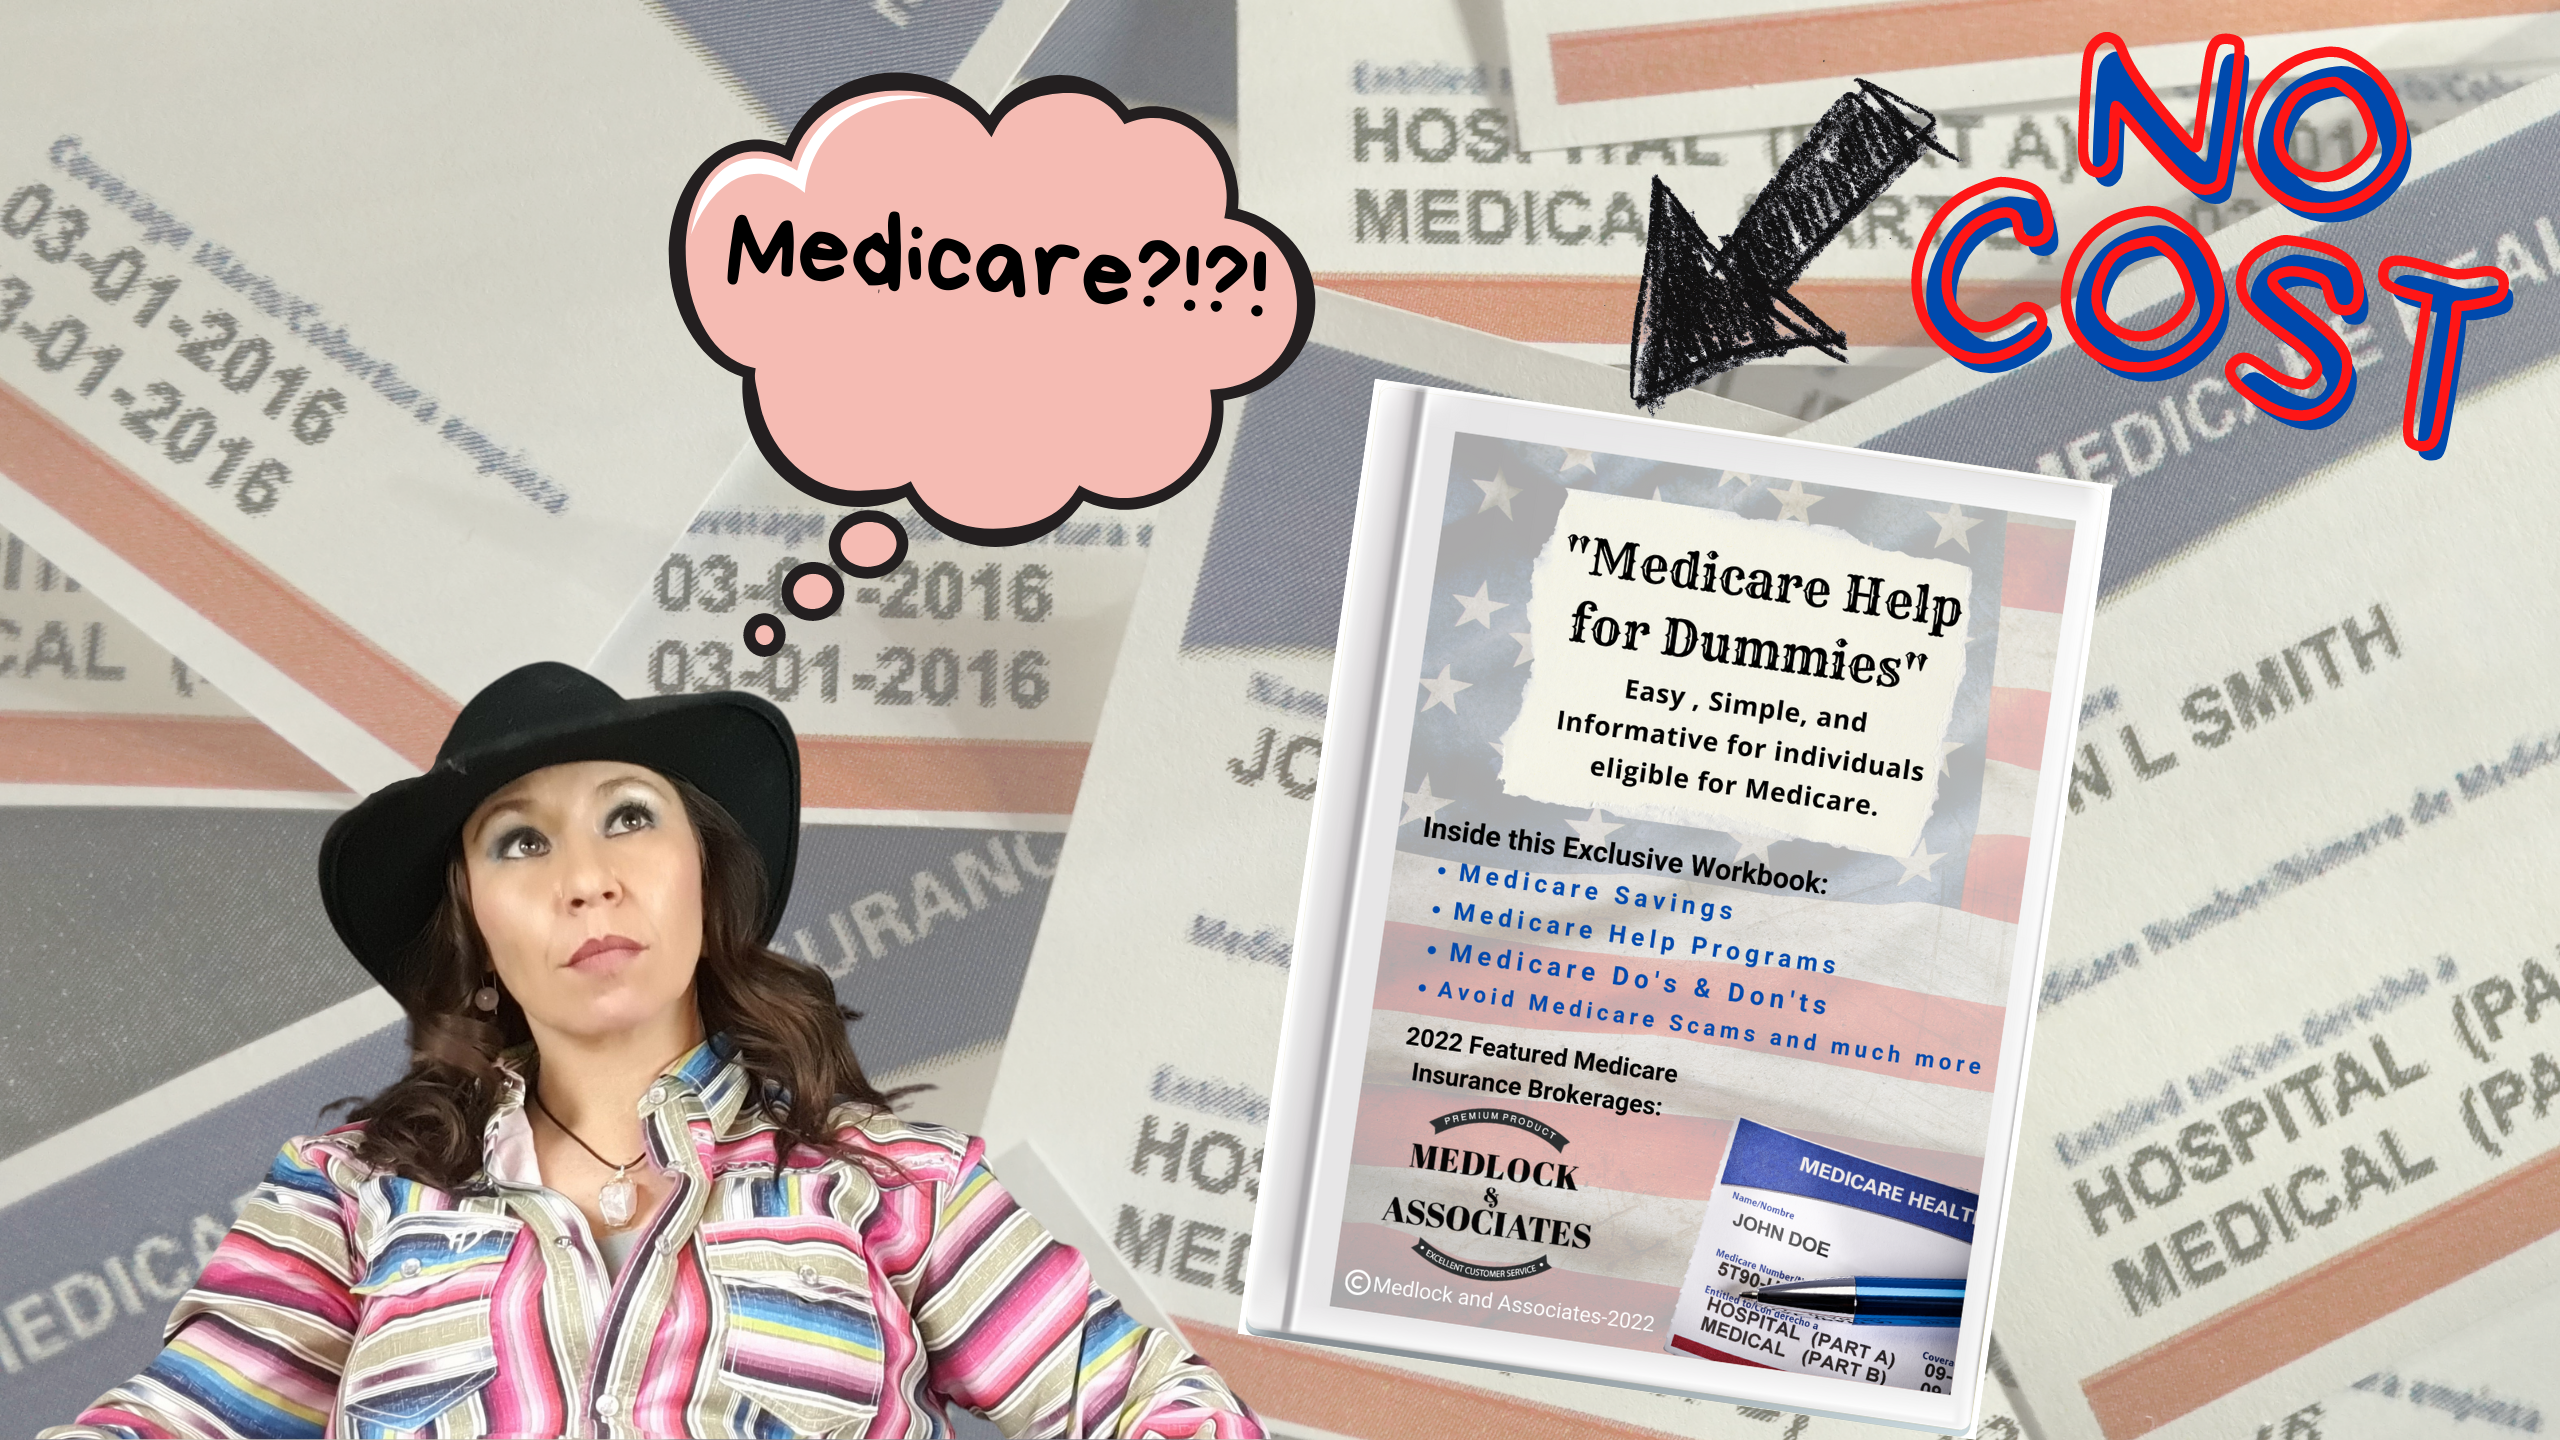 Medicare Help for dummies